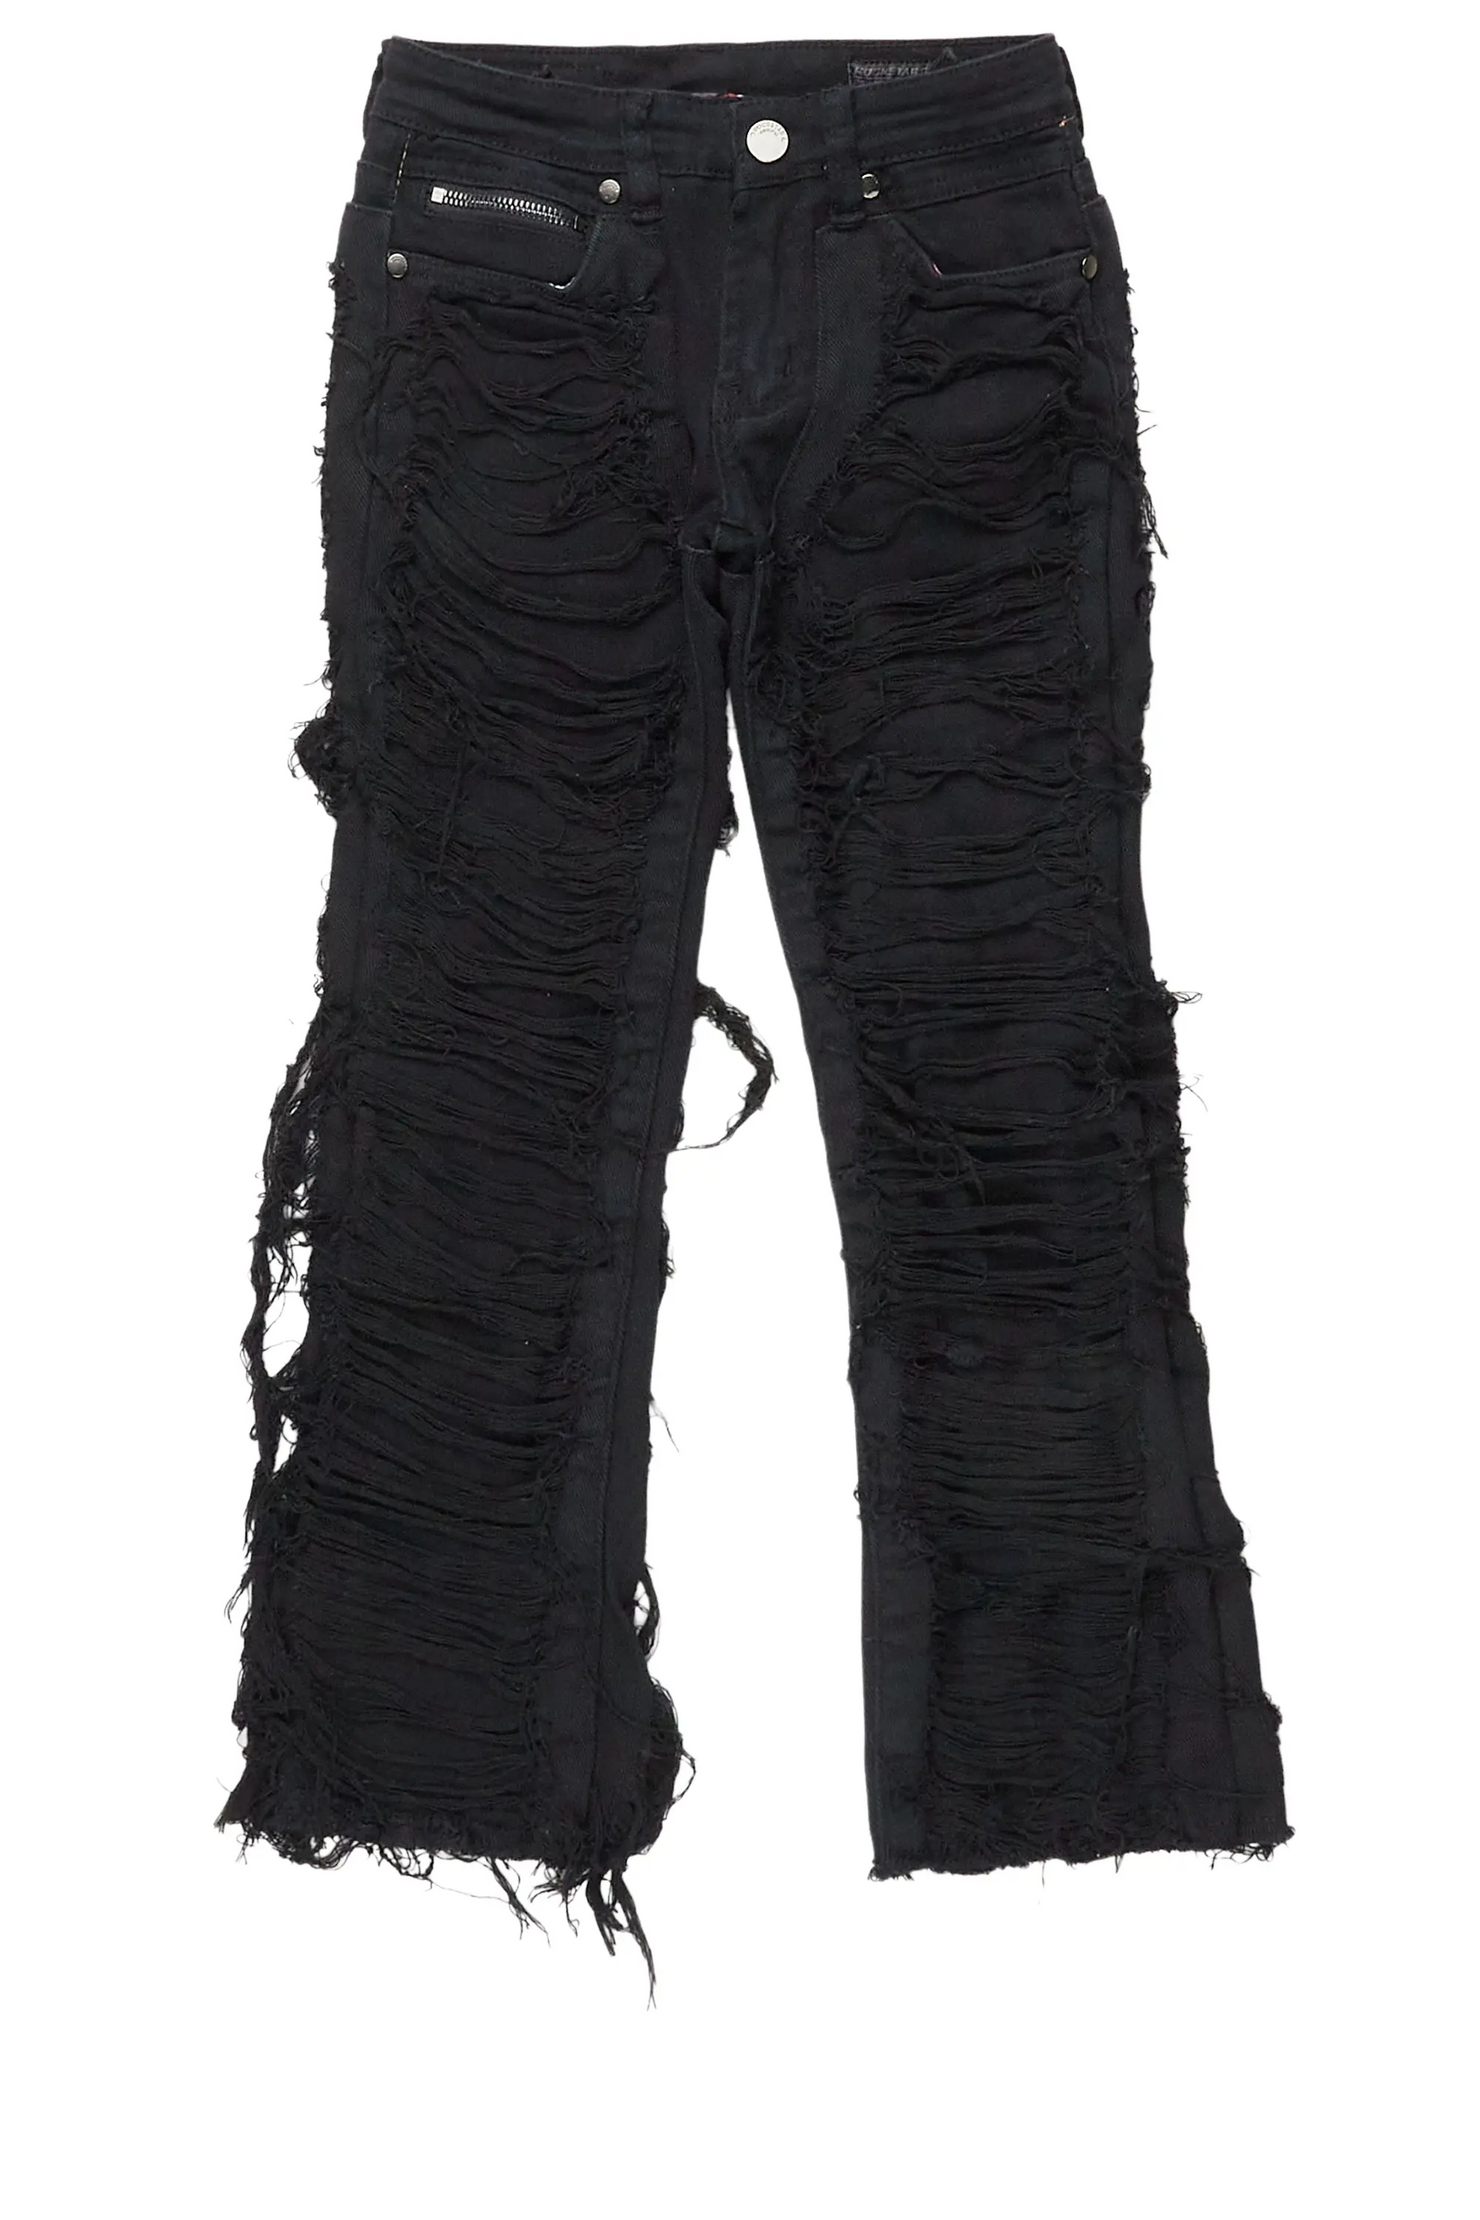 Girls Concetta Jet Black Stacked Flare Jean